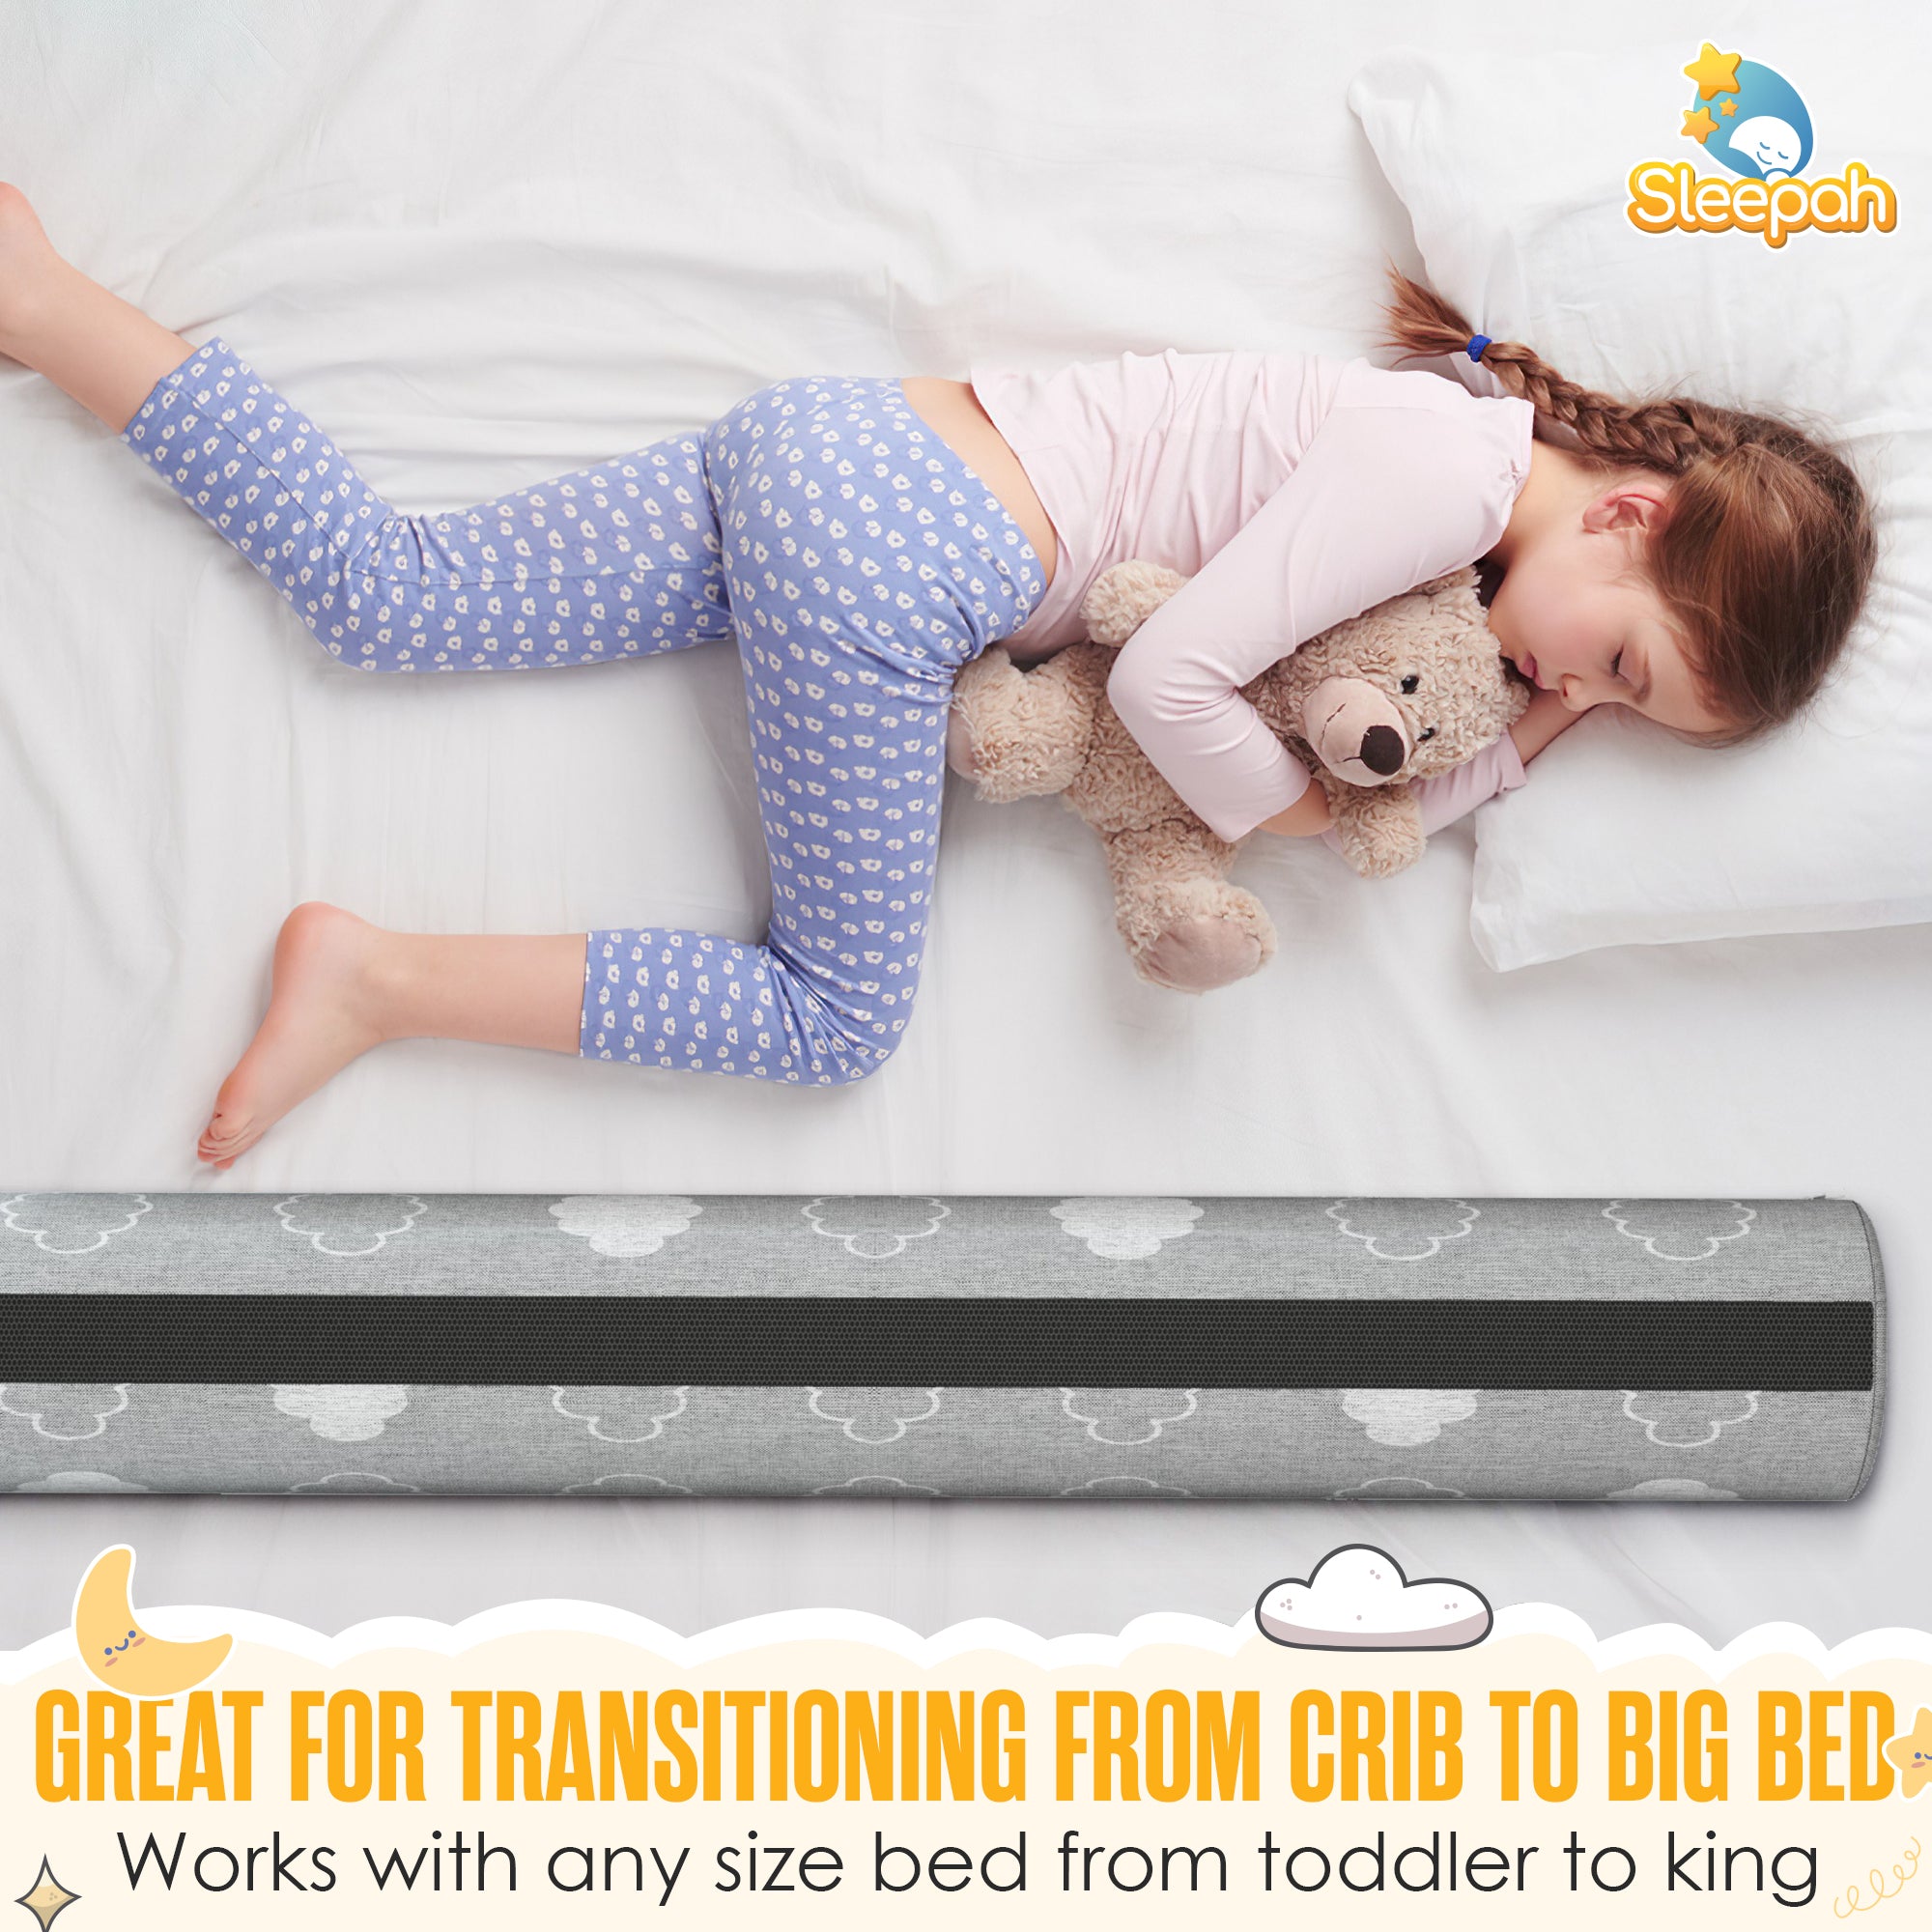 Sleepah Bed Rail for Toddlers Memory Foam Bed Bumper Guard w Dual Non